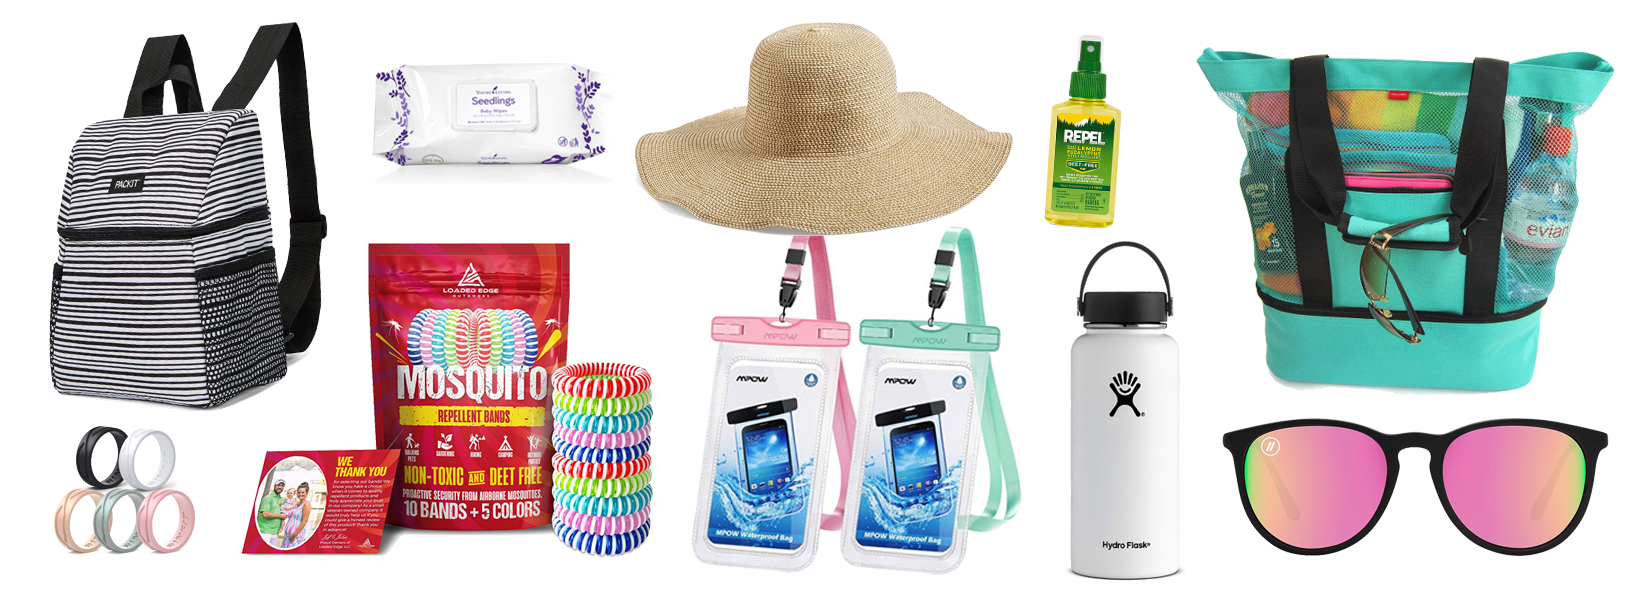 Summer Must Haves for Moms